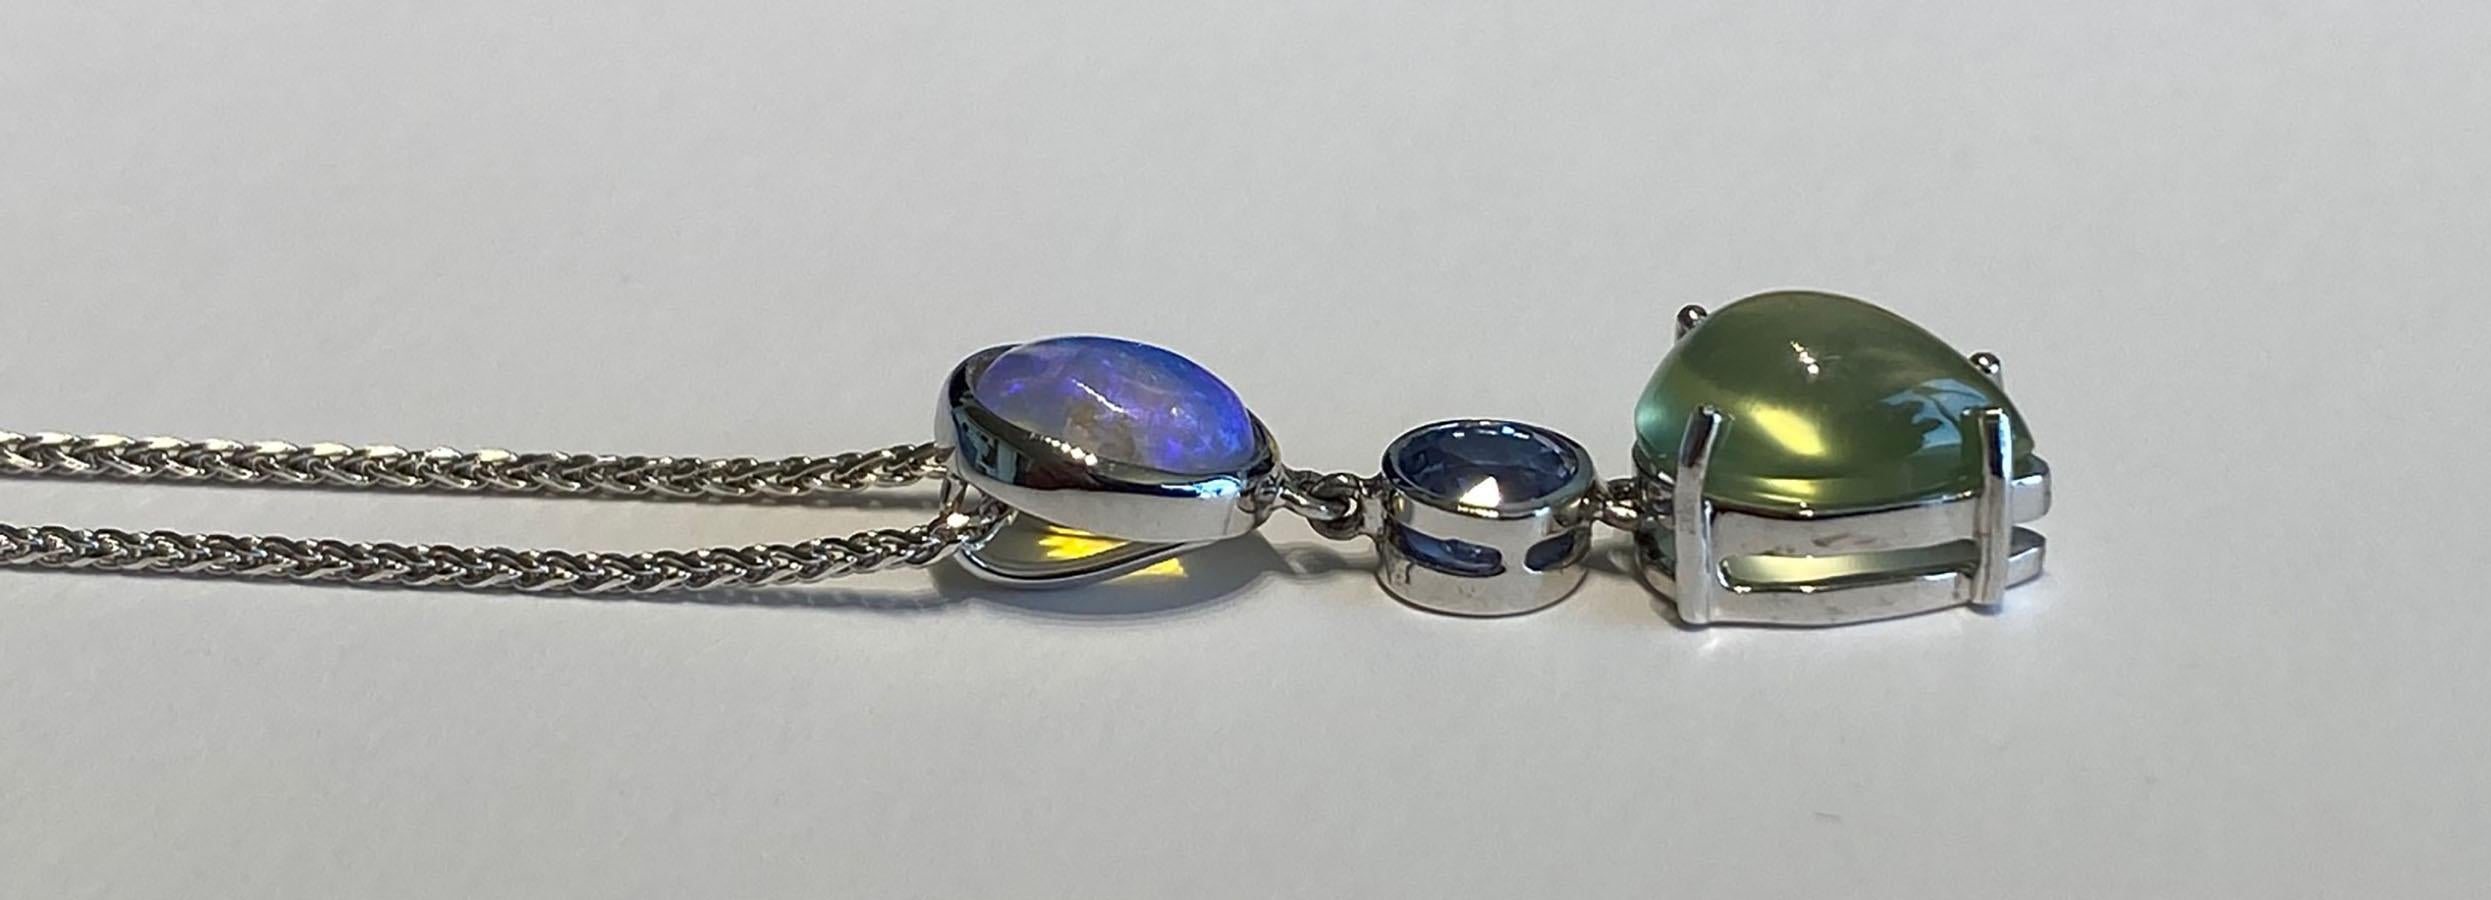 Kary Adam Designed, 18kt White Gold Pendant with Opal, Sapphire & Phrenite on an 18kt White Gold Chain of 18